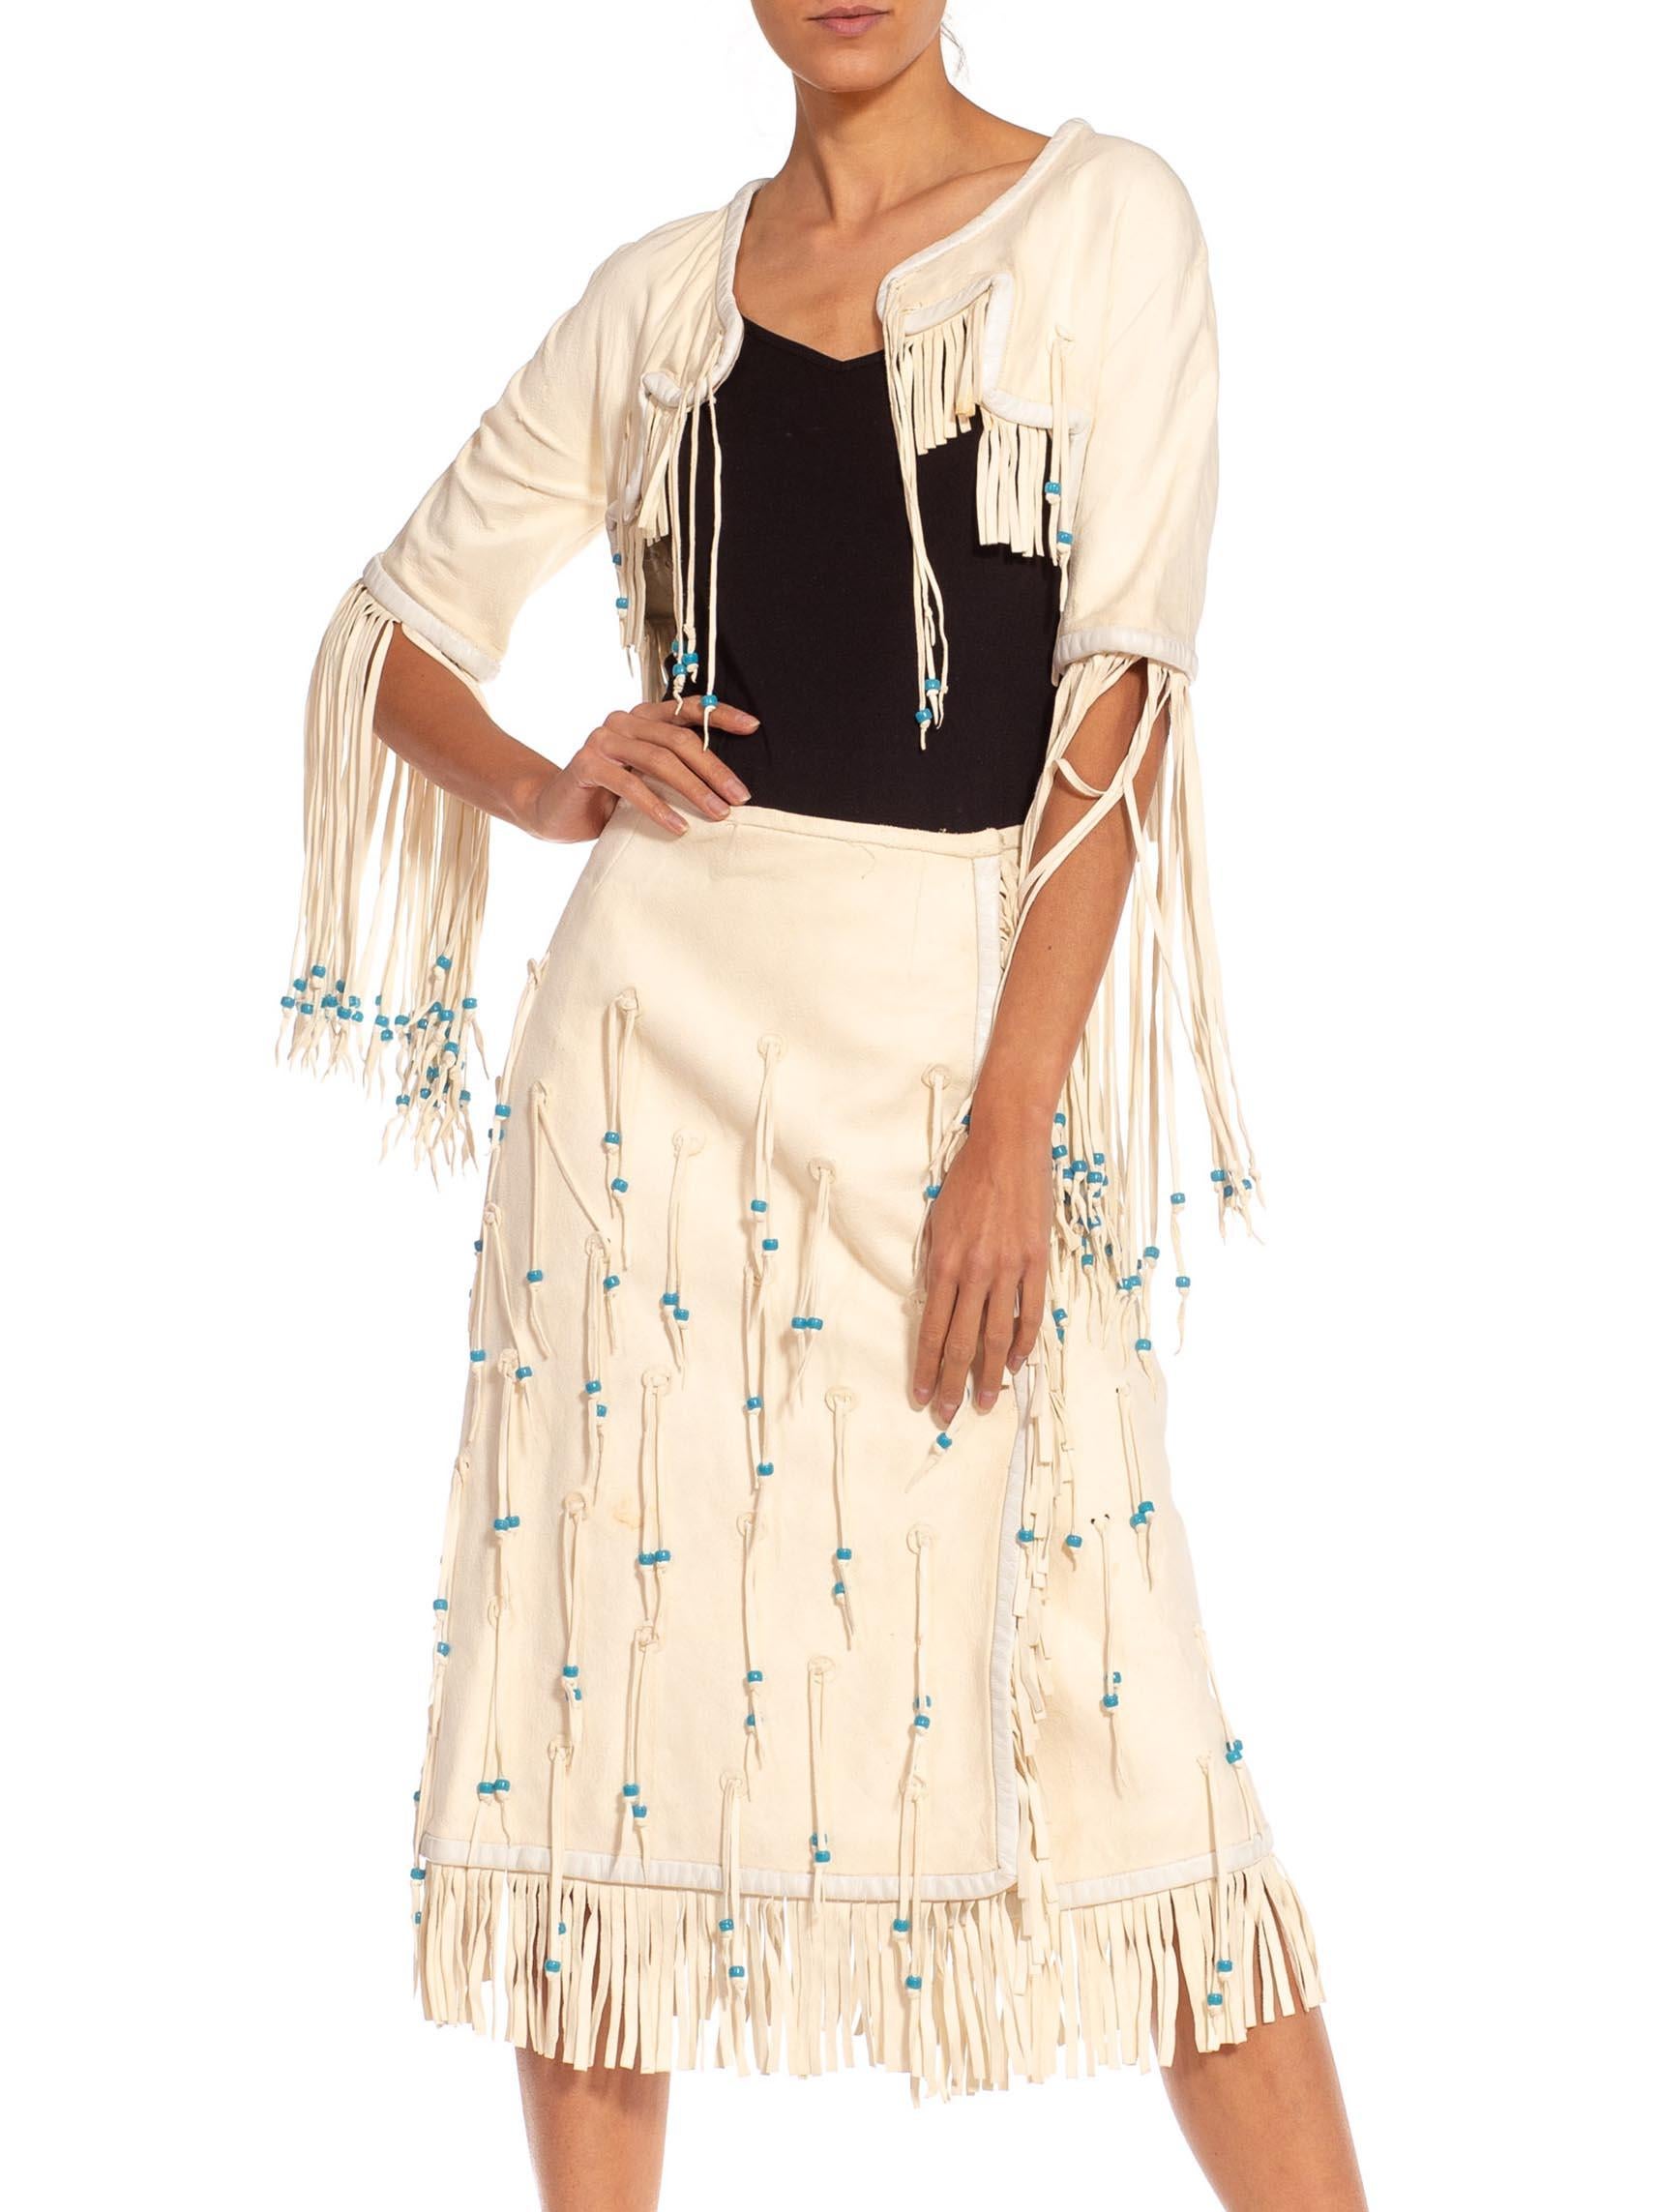 1970S GEORGIO SANT'angelo White & Blue Leather Suede Beaded Fringe Jacket Skirt In Excellent Condition For Sale In New York, NY